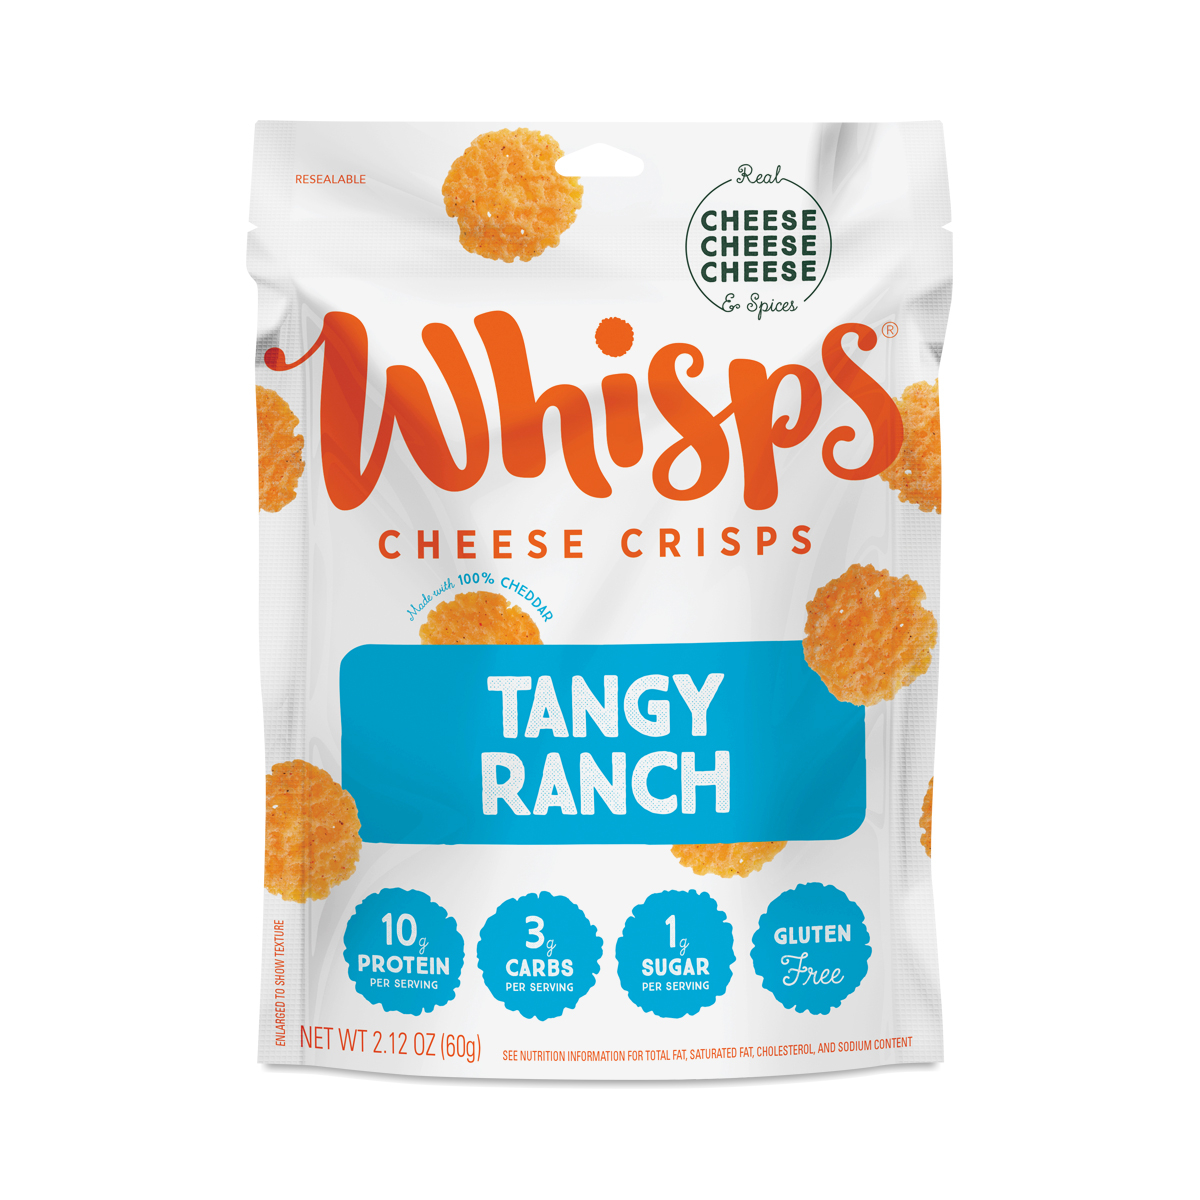 Whisps Tangy Ranch Cheese Crisps 2.12 oz pouch